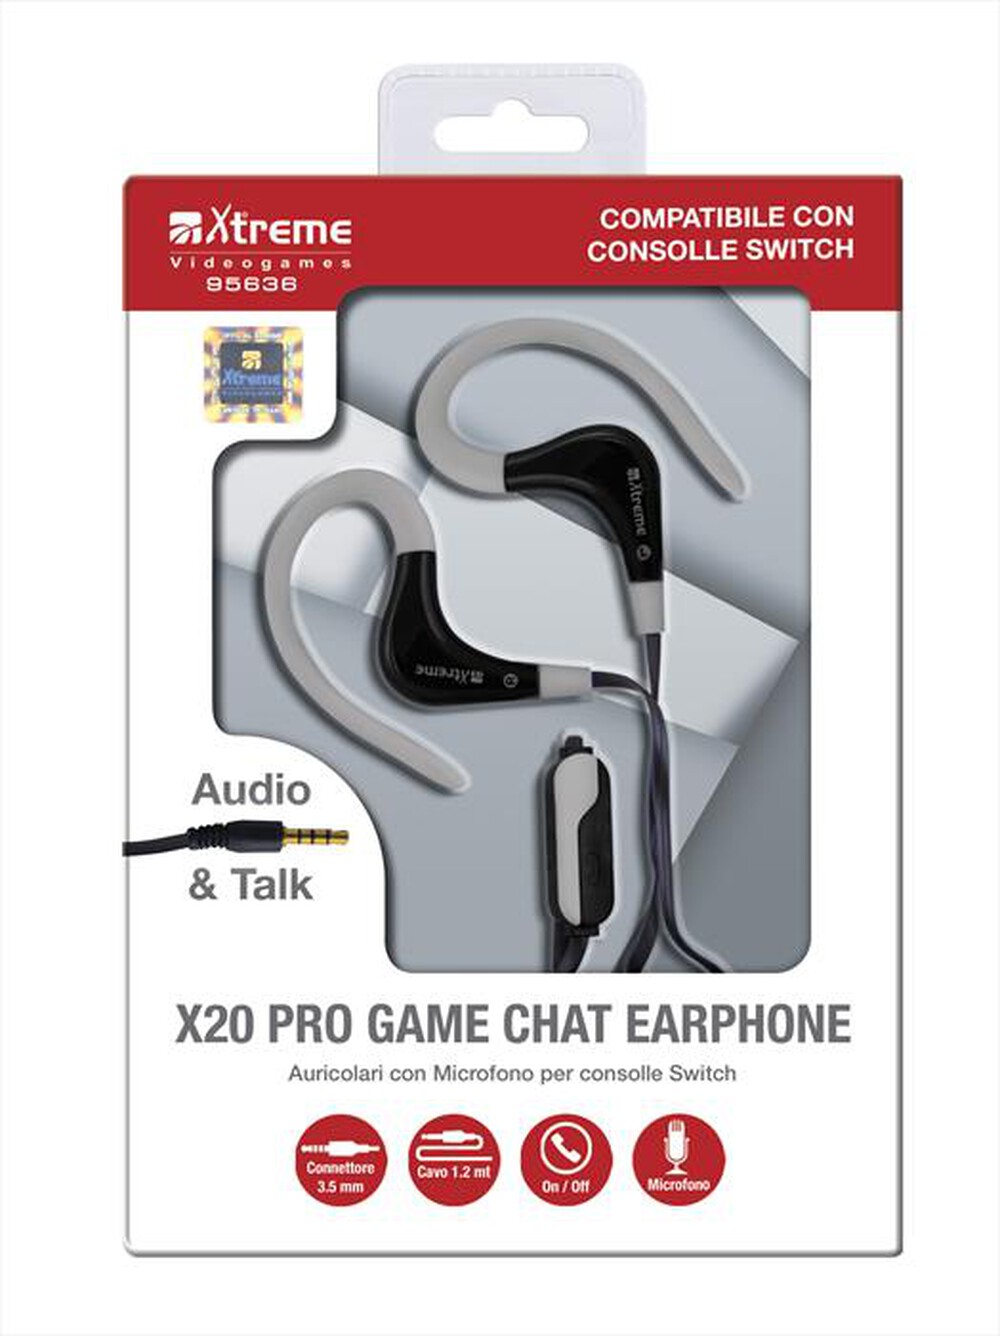 "XTREME - 95636 - Switch Earphone X20 Pro Game Chat - "